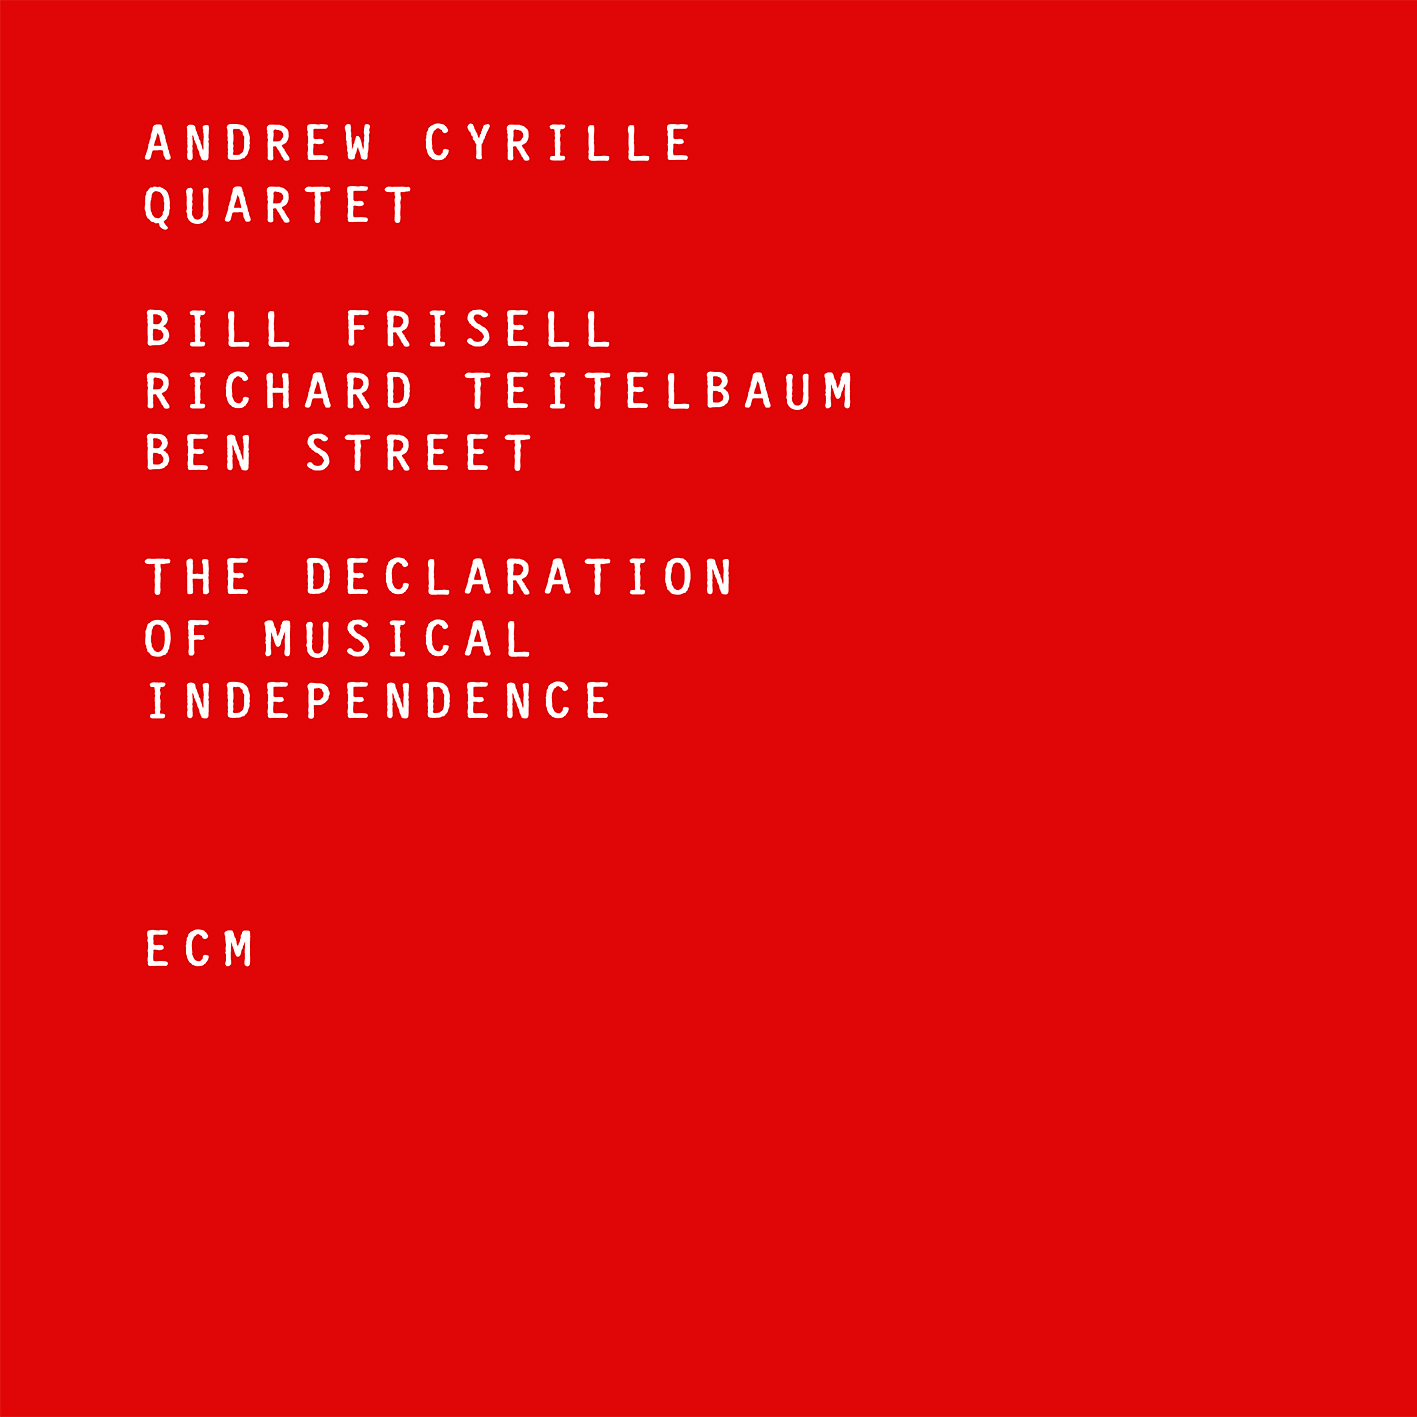 Andrew Cyrille Quartet – The Declaration Of Musical Independence (2016) [HDTracks FLAC 24bit/96kHz]